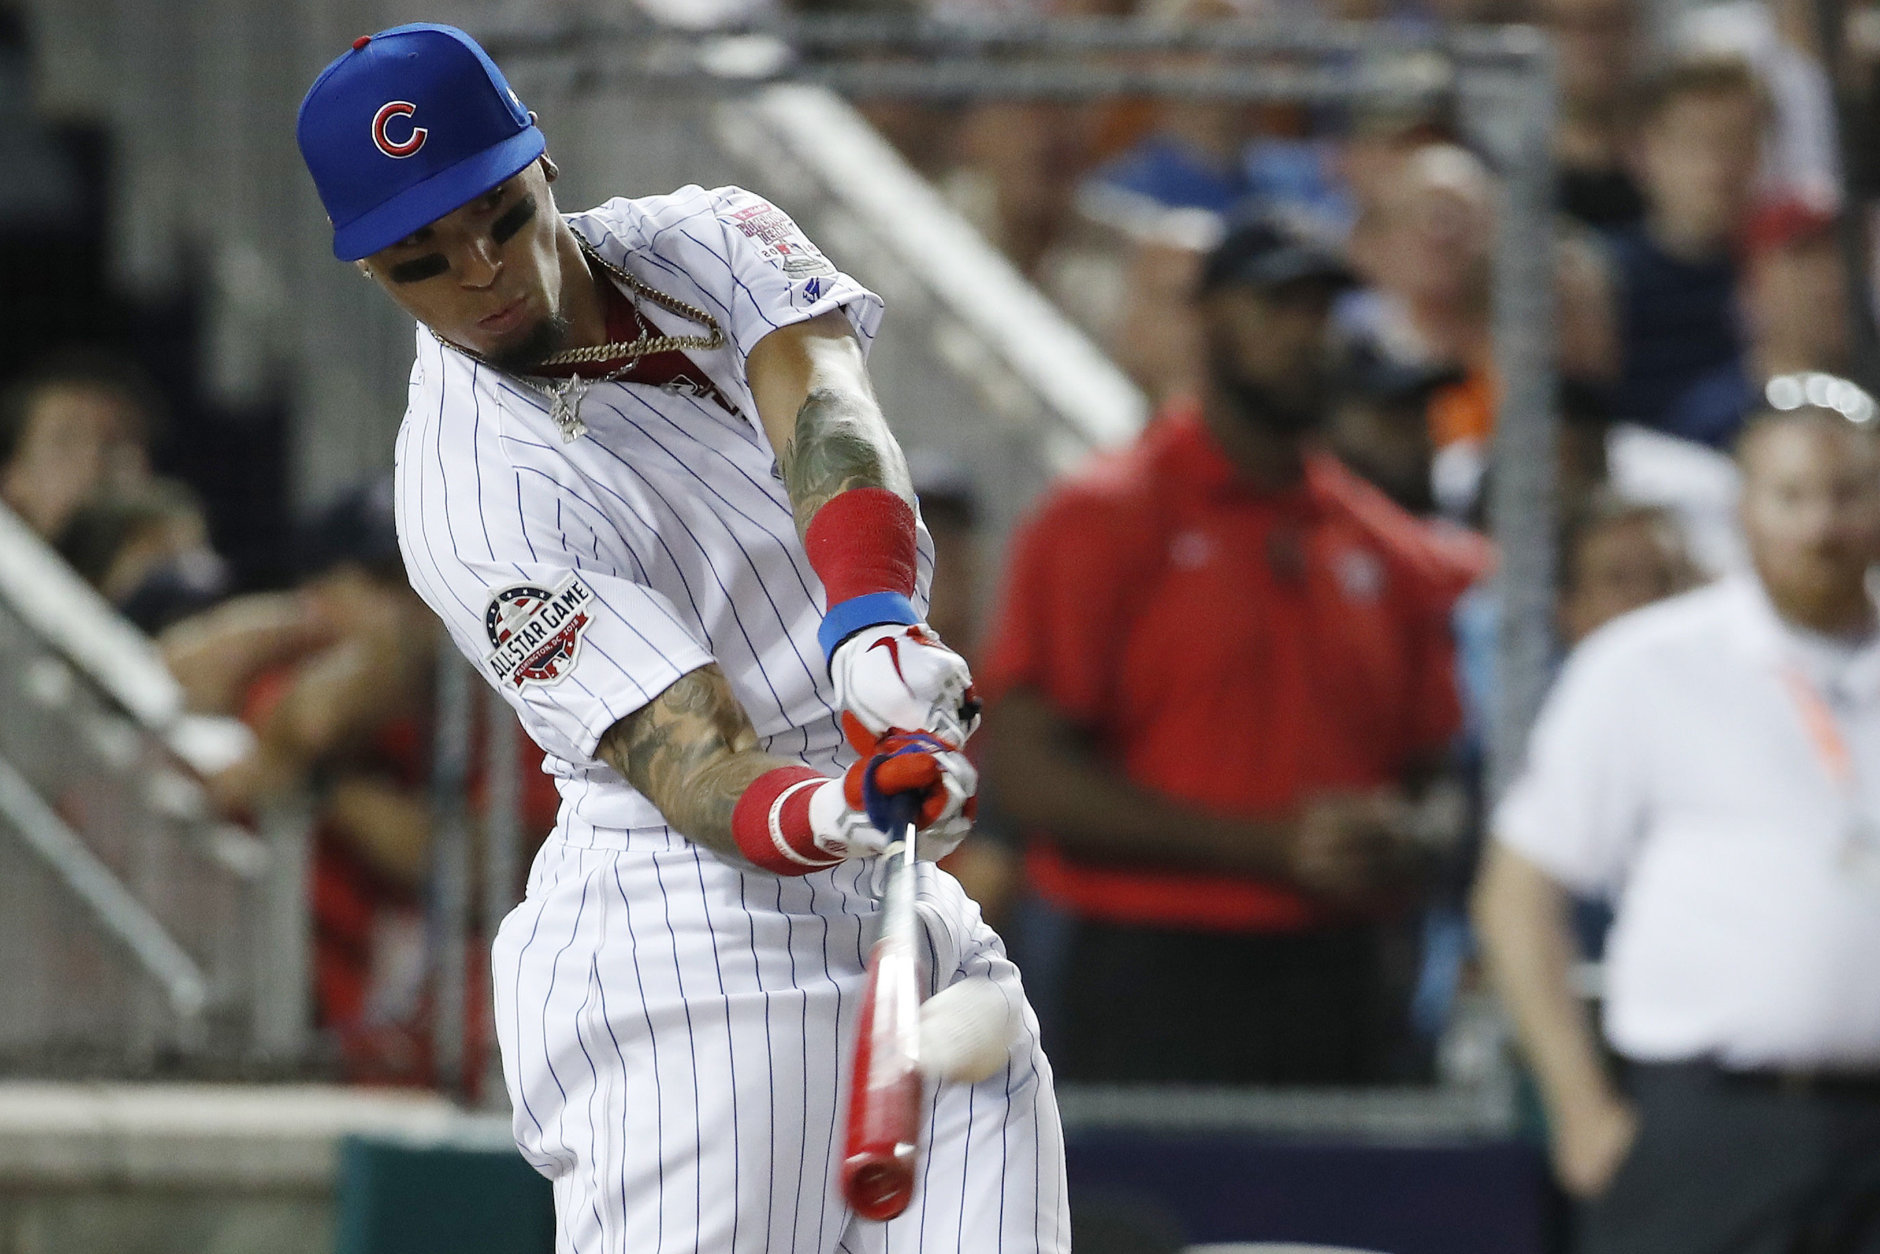 Chicago Cubs Javier Báez (9) hits during the MLB Home Run Derby, at Nationals Park, Monday, July 16, 2018 in Washington. The 89th MLB baseball All-Star Game will be played Tuesday. (AP Photo/Alex Brandon)